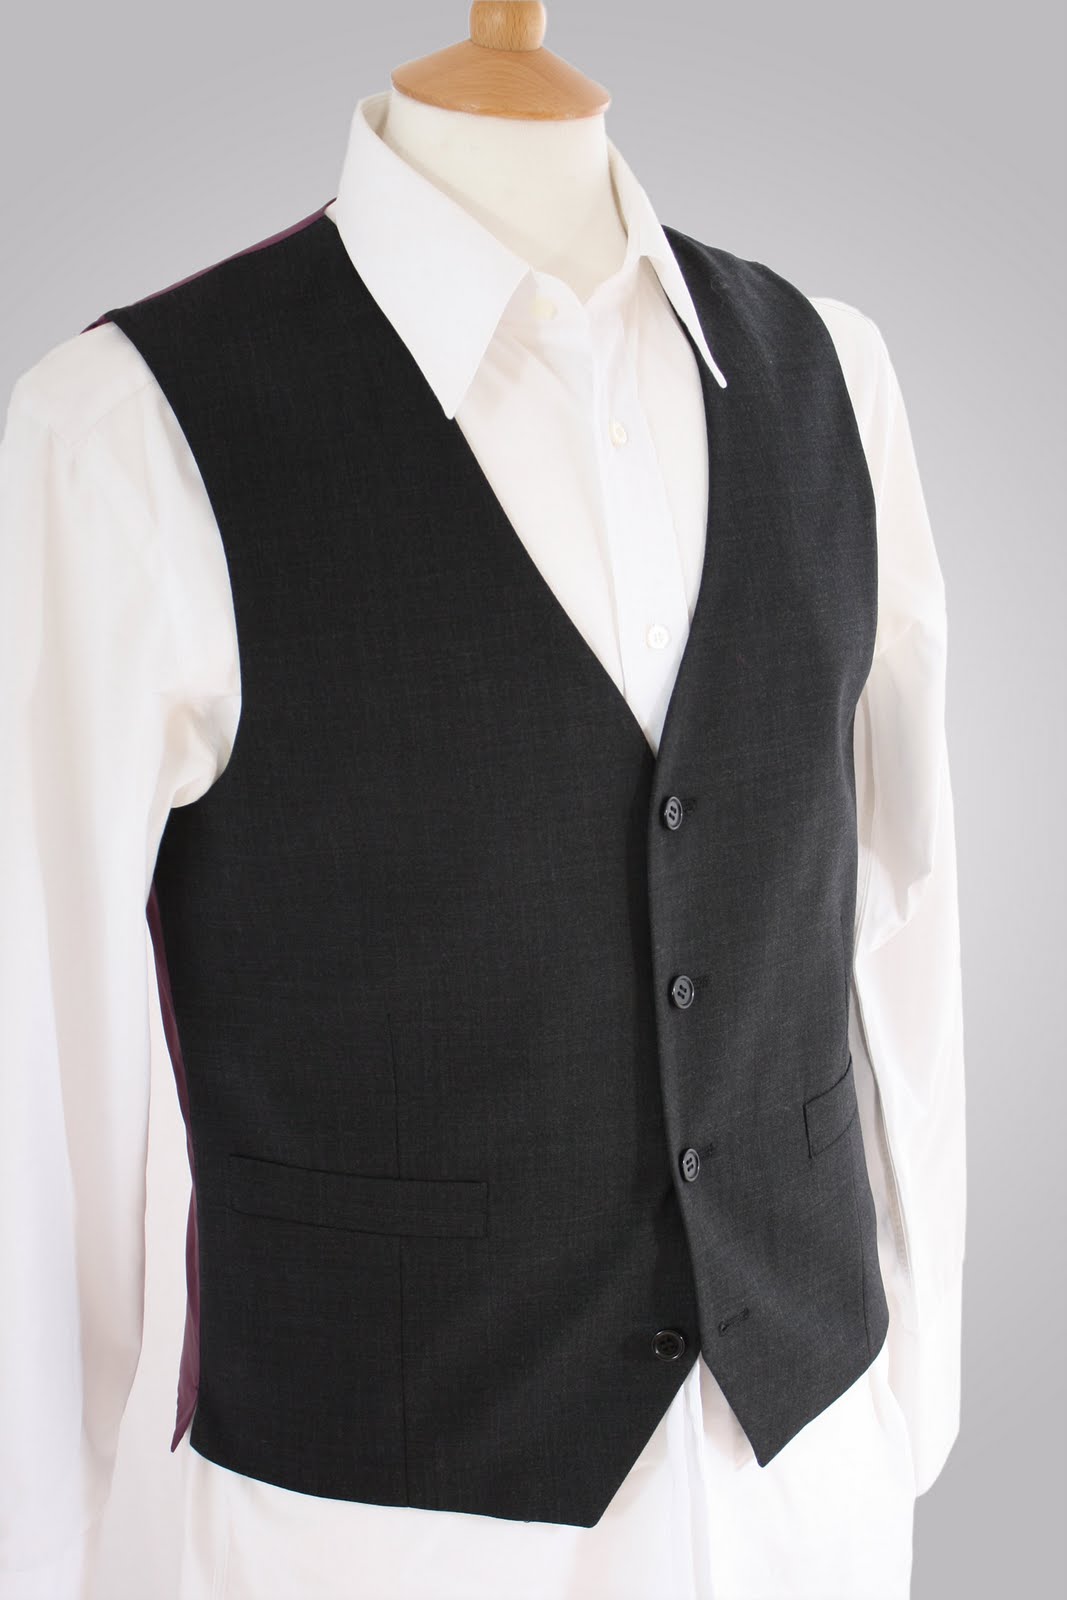 Formal waistcoats for men - Beauty and Trends